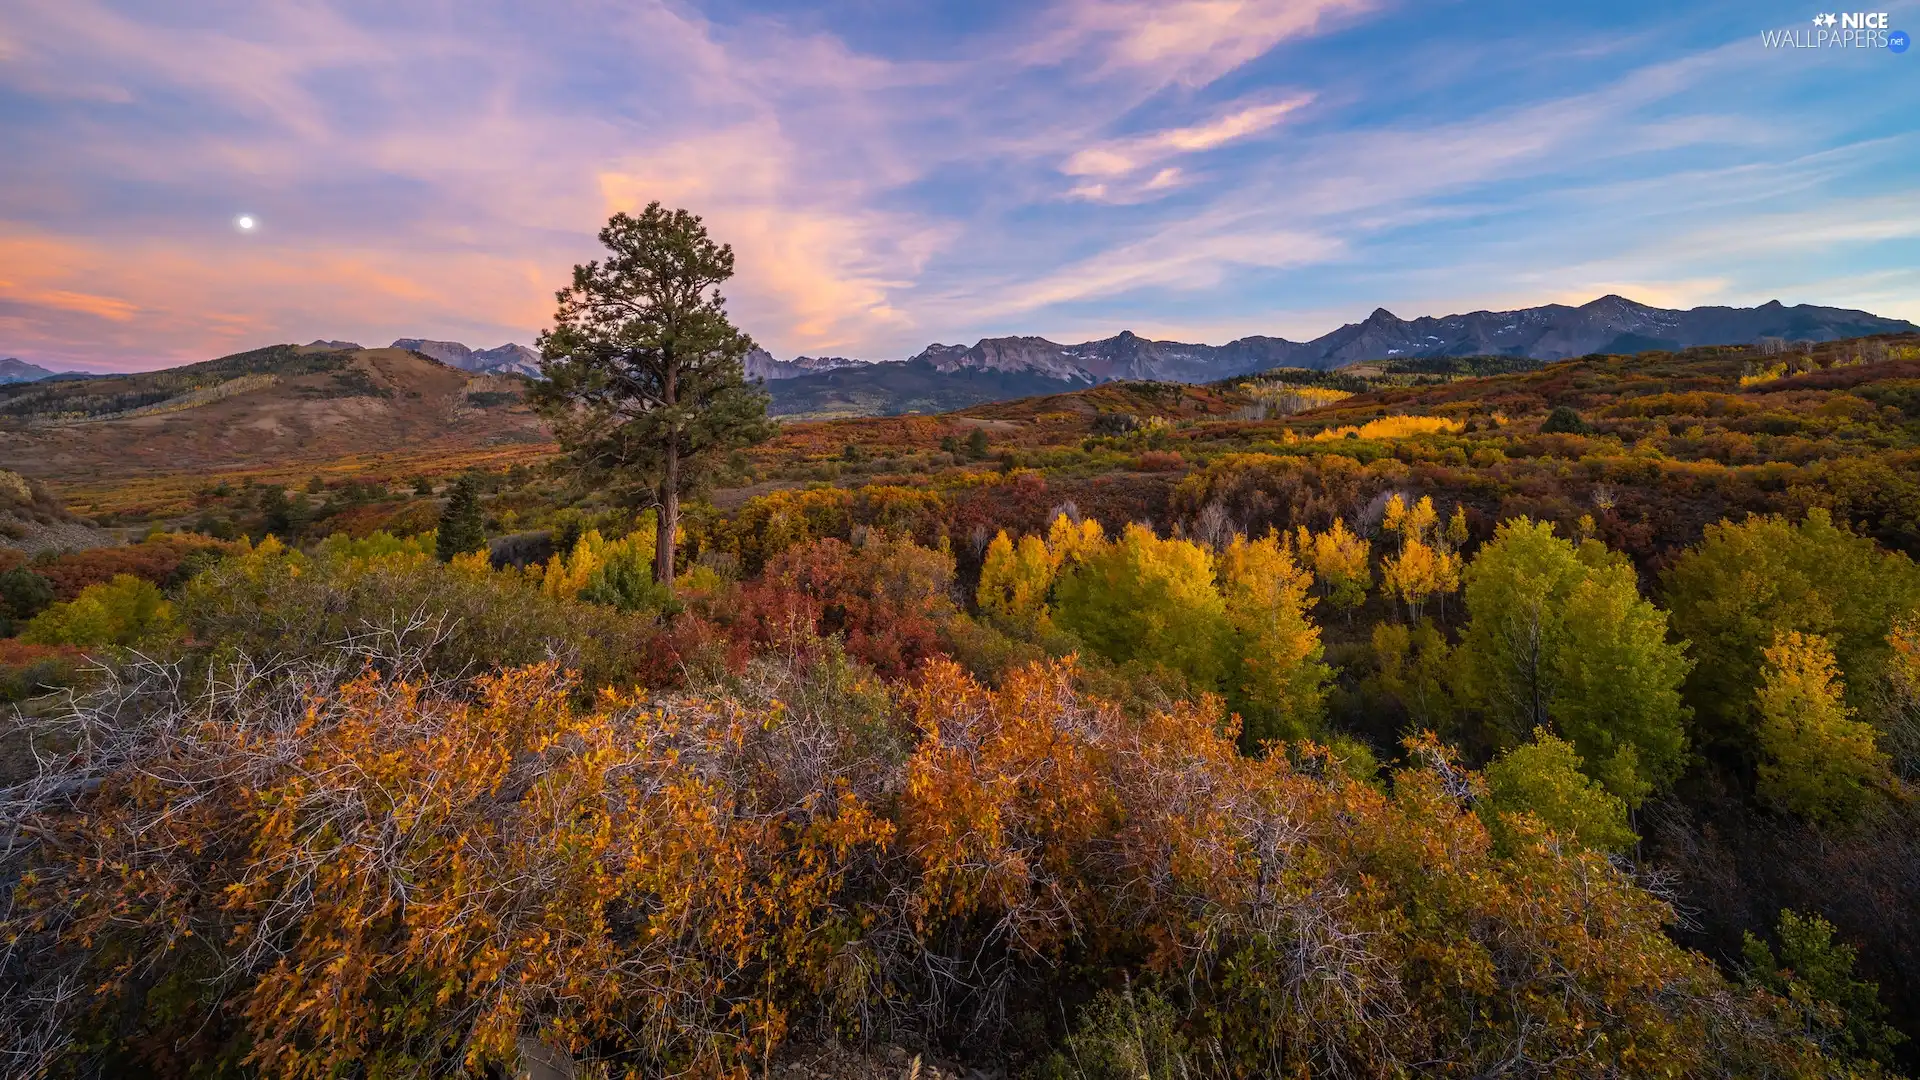 State of Colorado, The United States, Telluride, autumn, trees, moon, VEGETATION, Coloured, The Hills